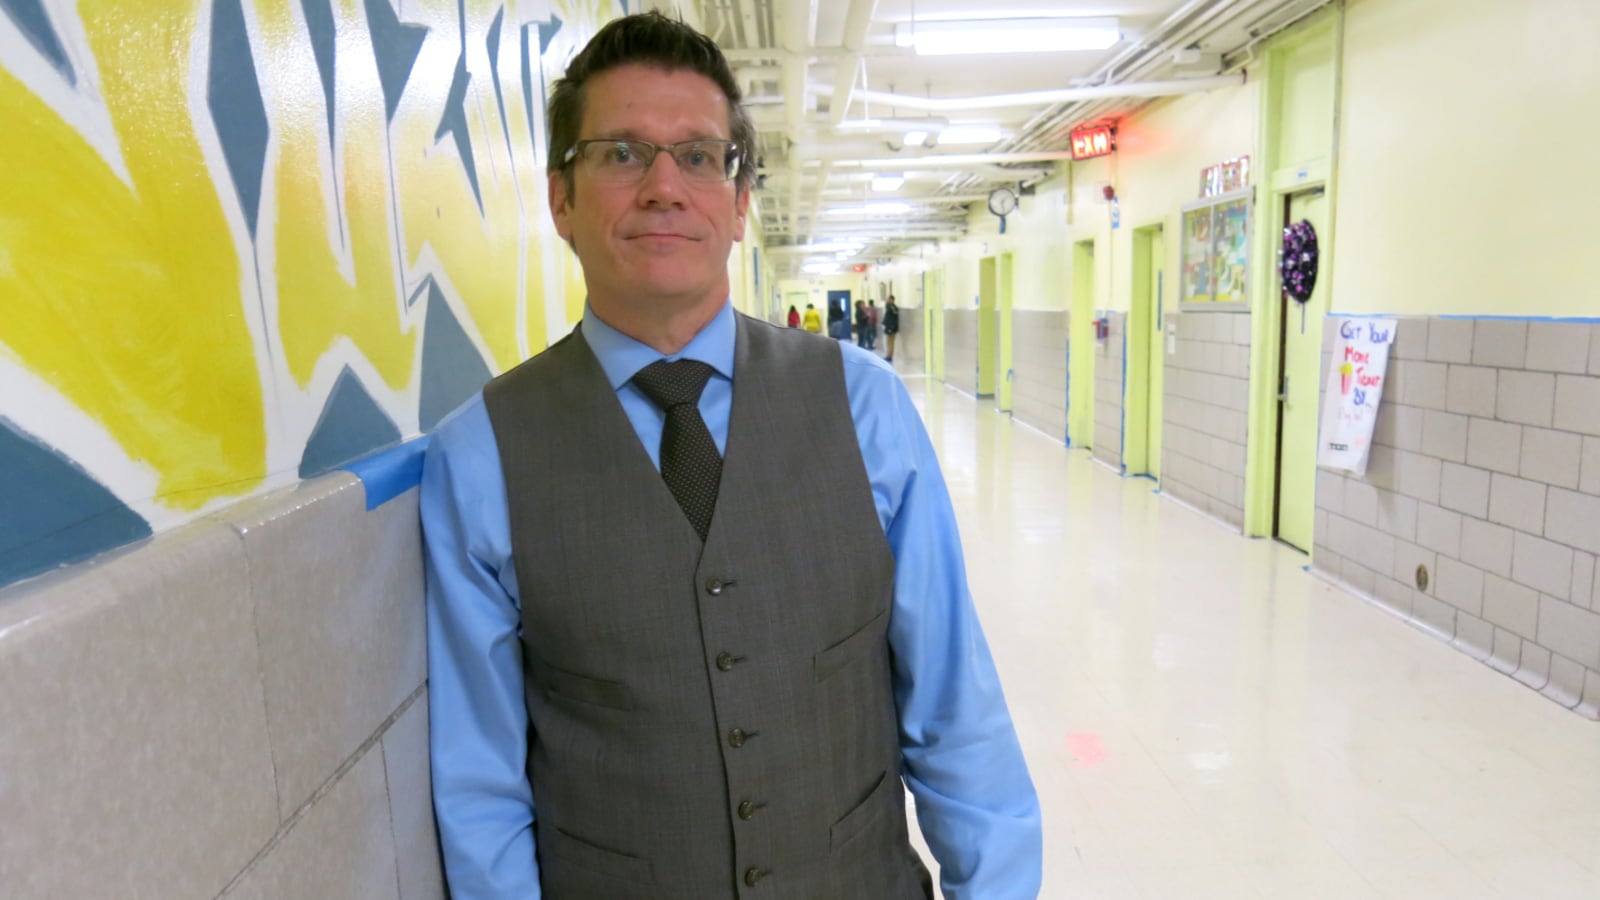 Principal James Waslawski designed New Directions Secondary School for middle school students who are overage and off track.